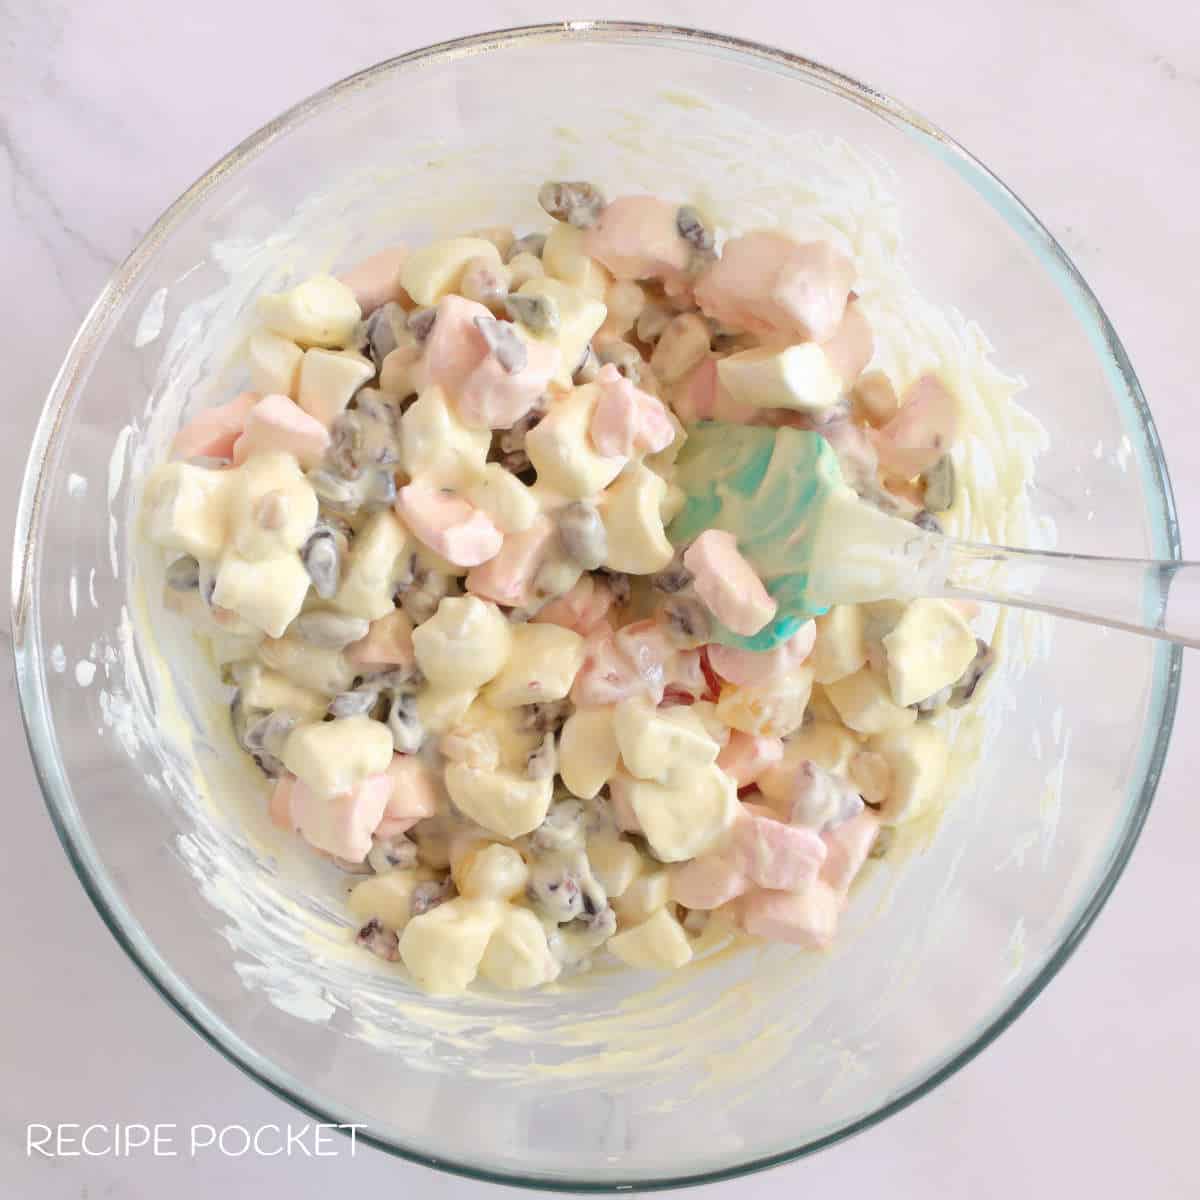 White chocolate rocky road mixture in a bowl.